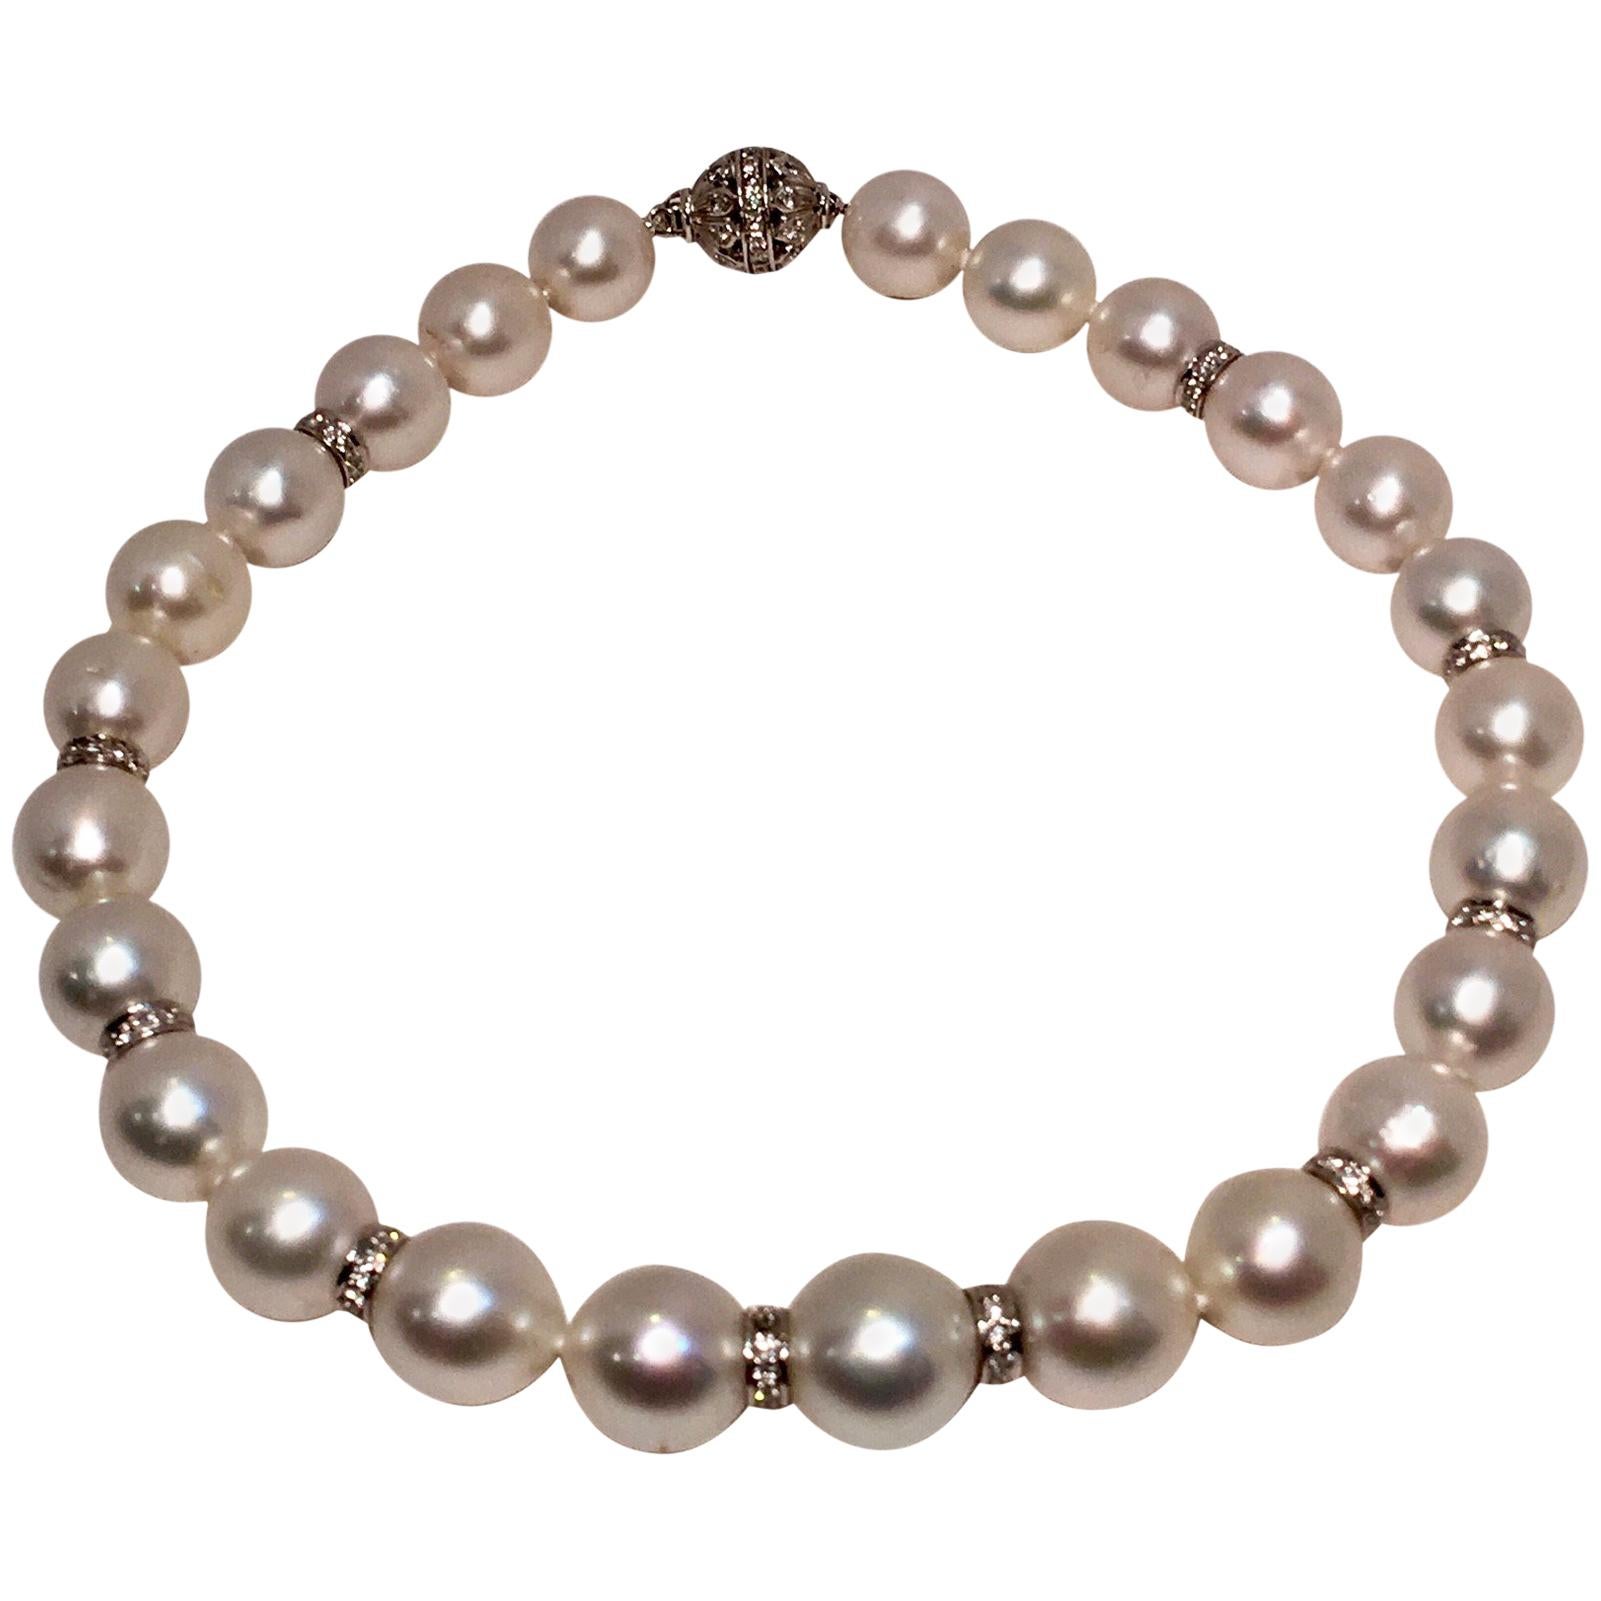 Graduated Strand of Large White South Sea Pearls with Diamonds in White Gold